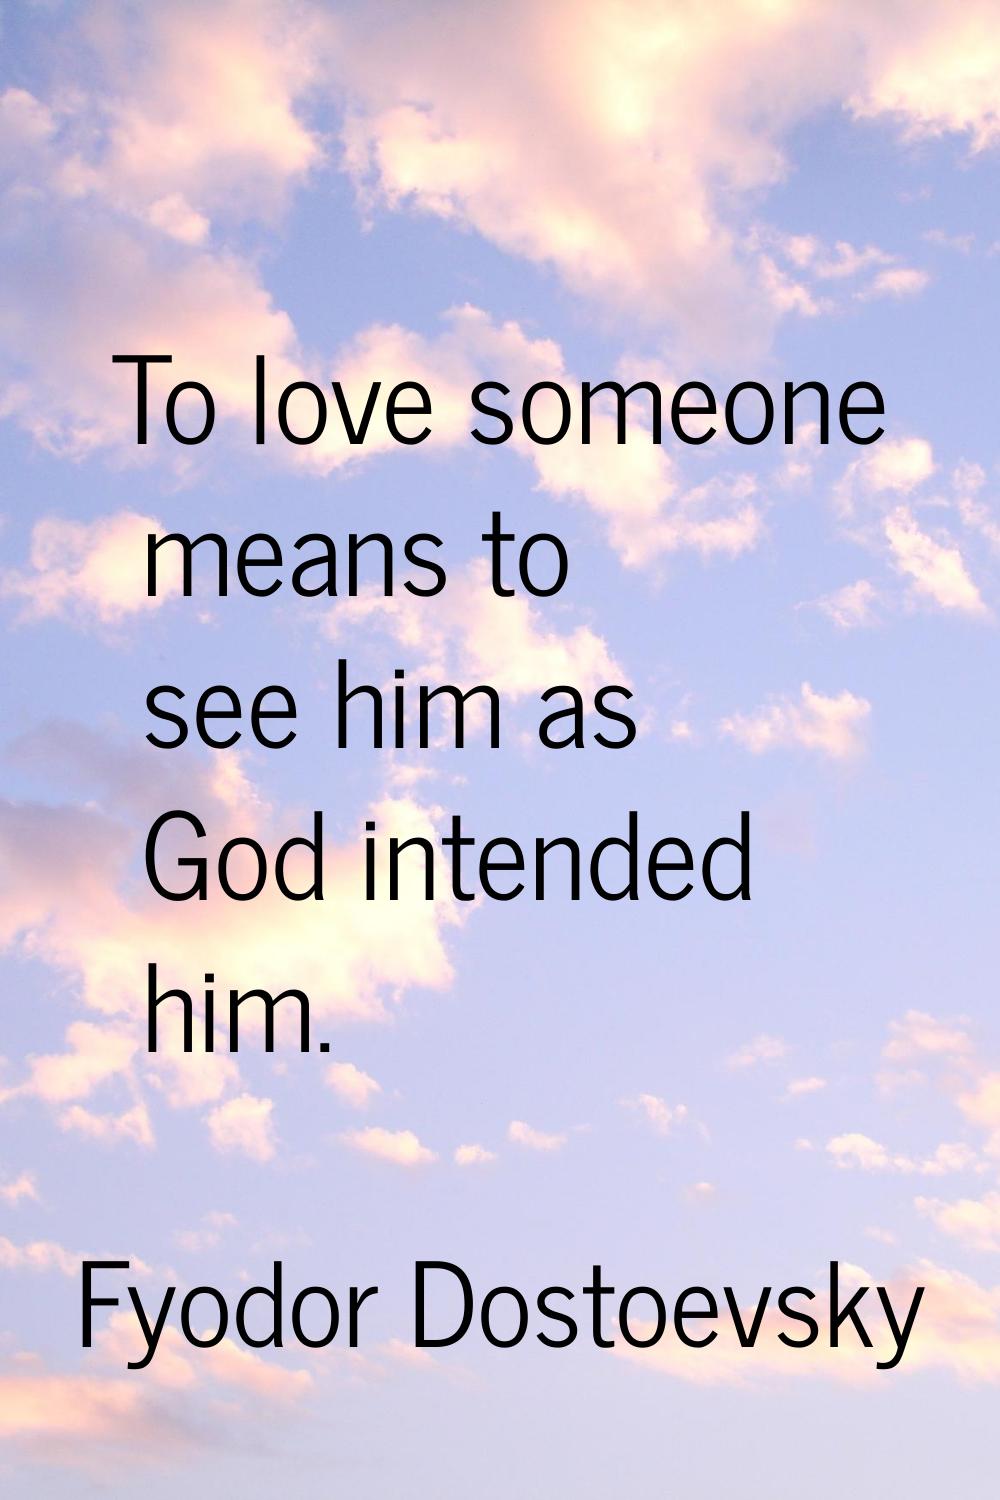 To love someone means to see him as God intended him.